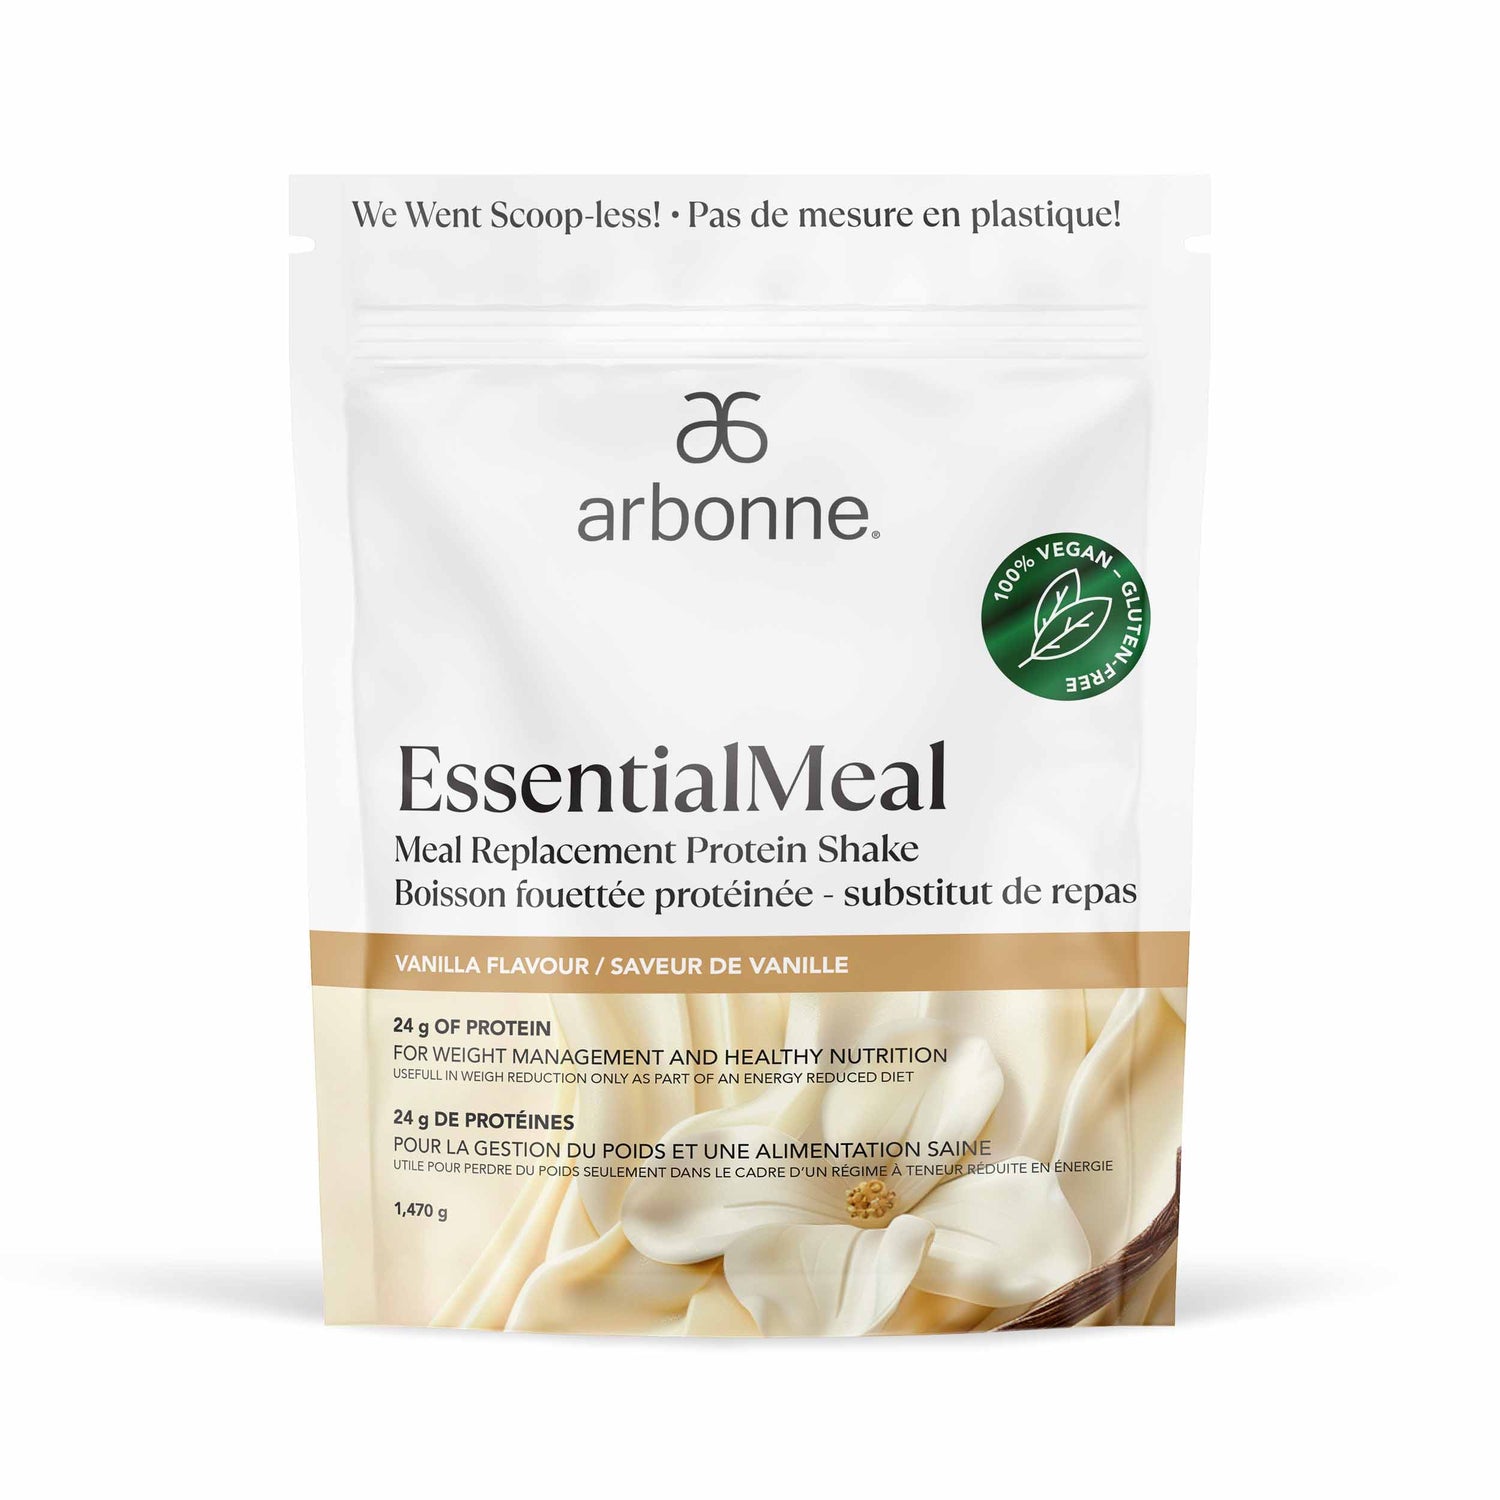 Arbonne EssentialMeal vanilla flavor meal replacement protein shake packet, vegan and gluten-free.